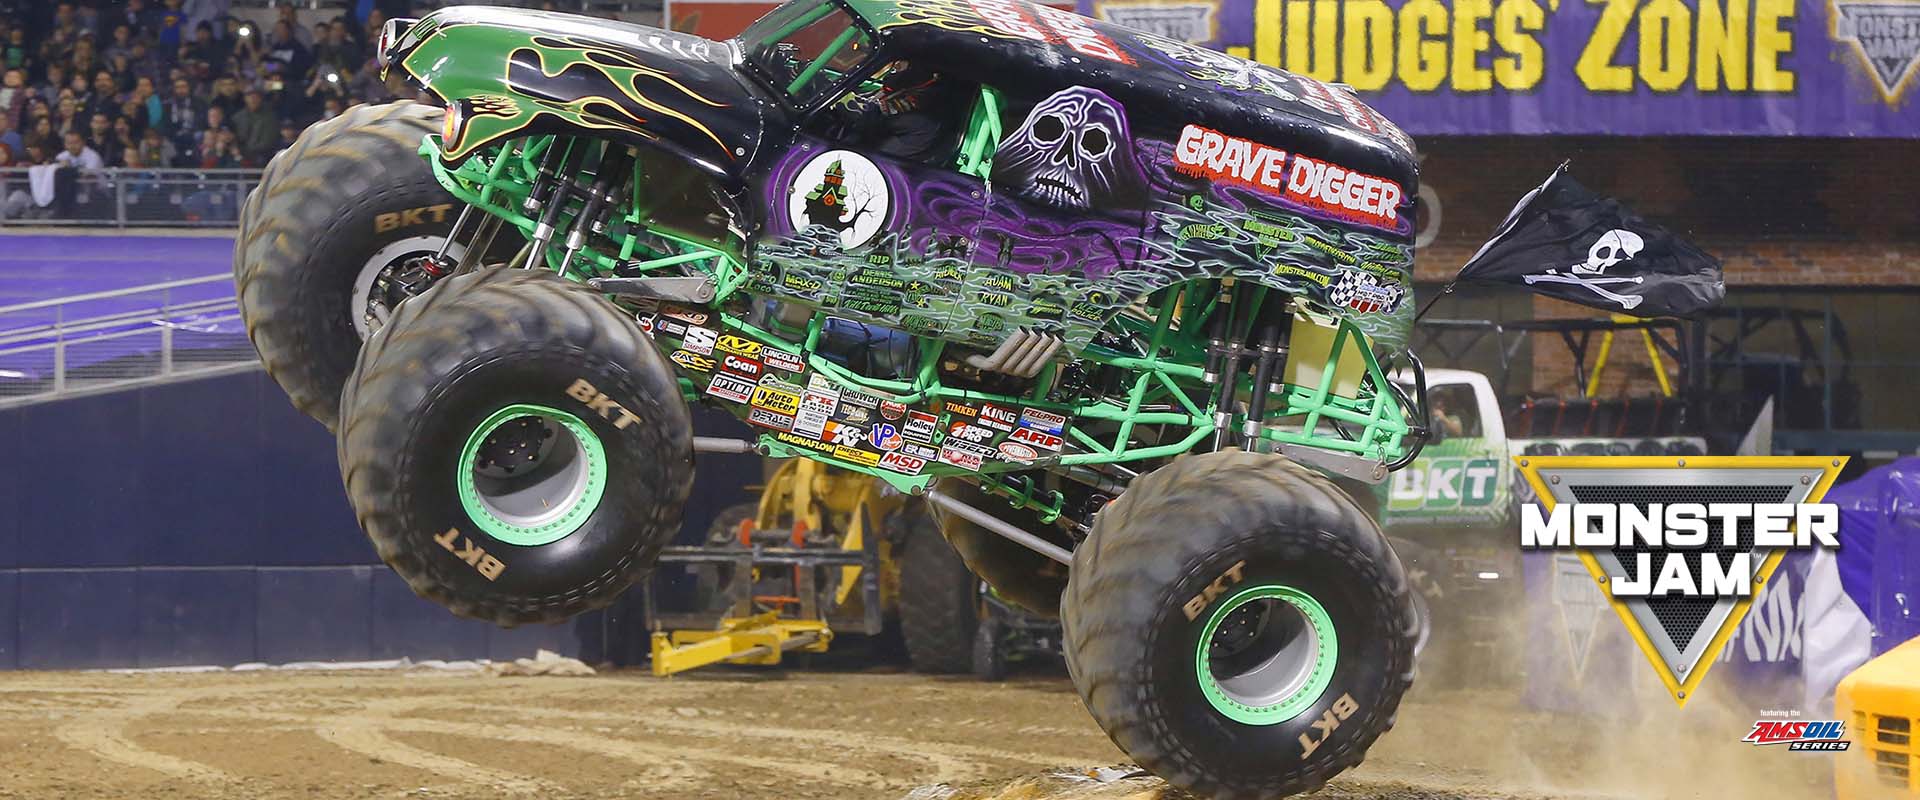 Amazing Monster Jam Pictures & Backgrounds